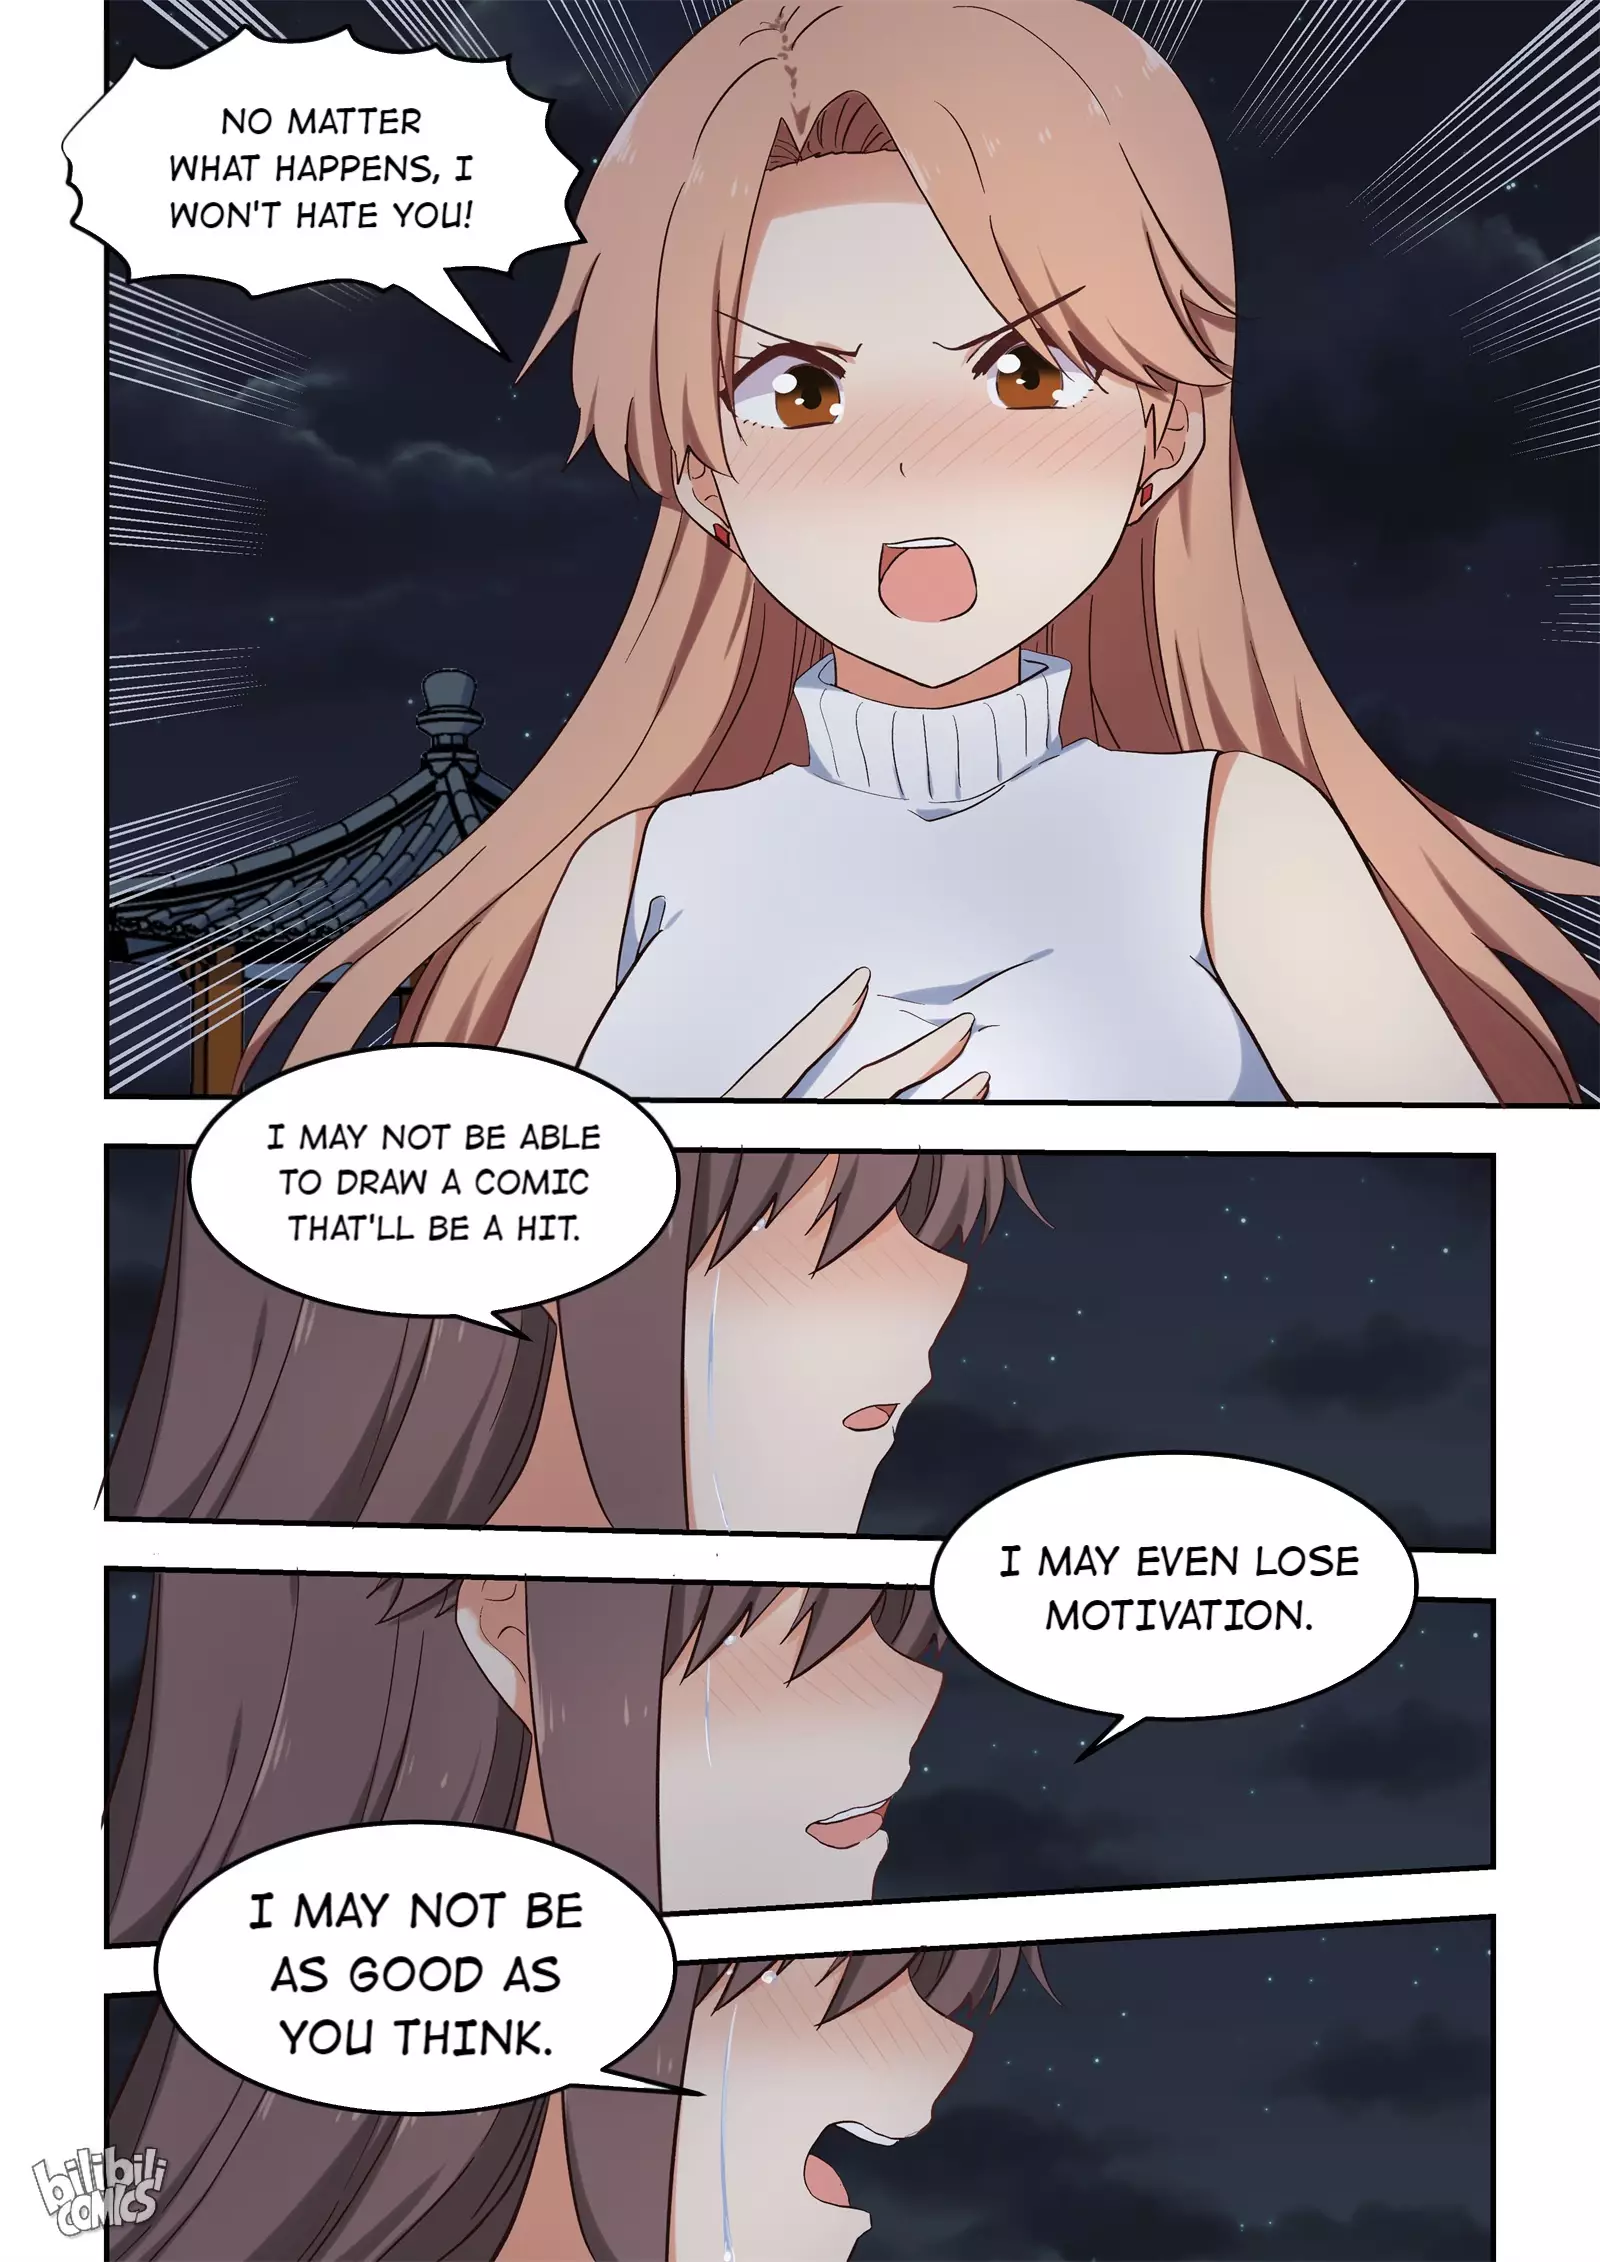 I Decided To Offer Myself To Motivate Senpai - 118 page 10-8110d07a